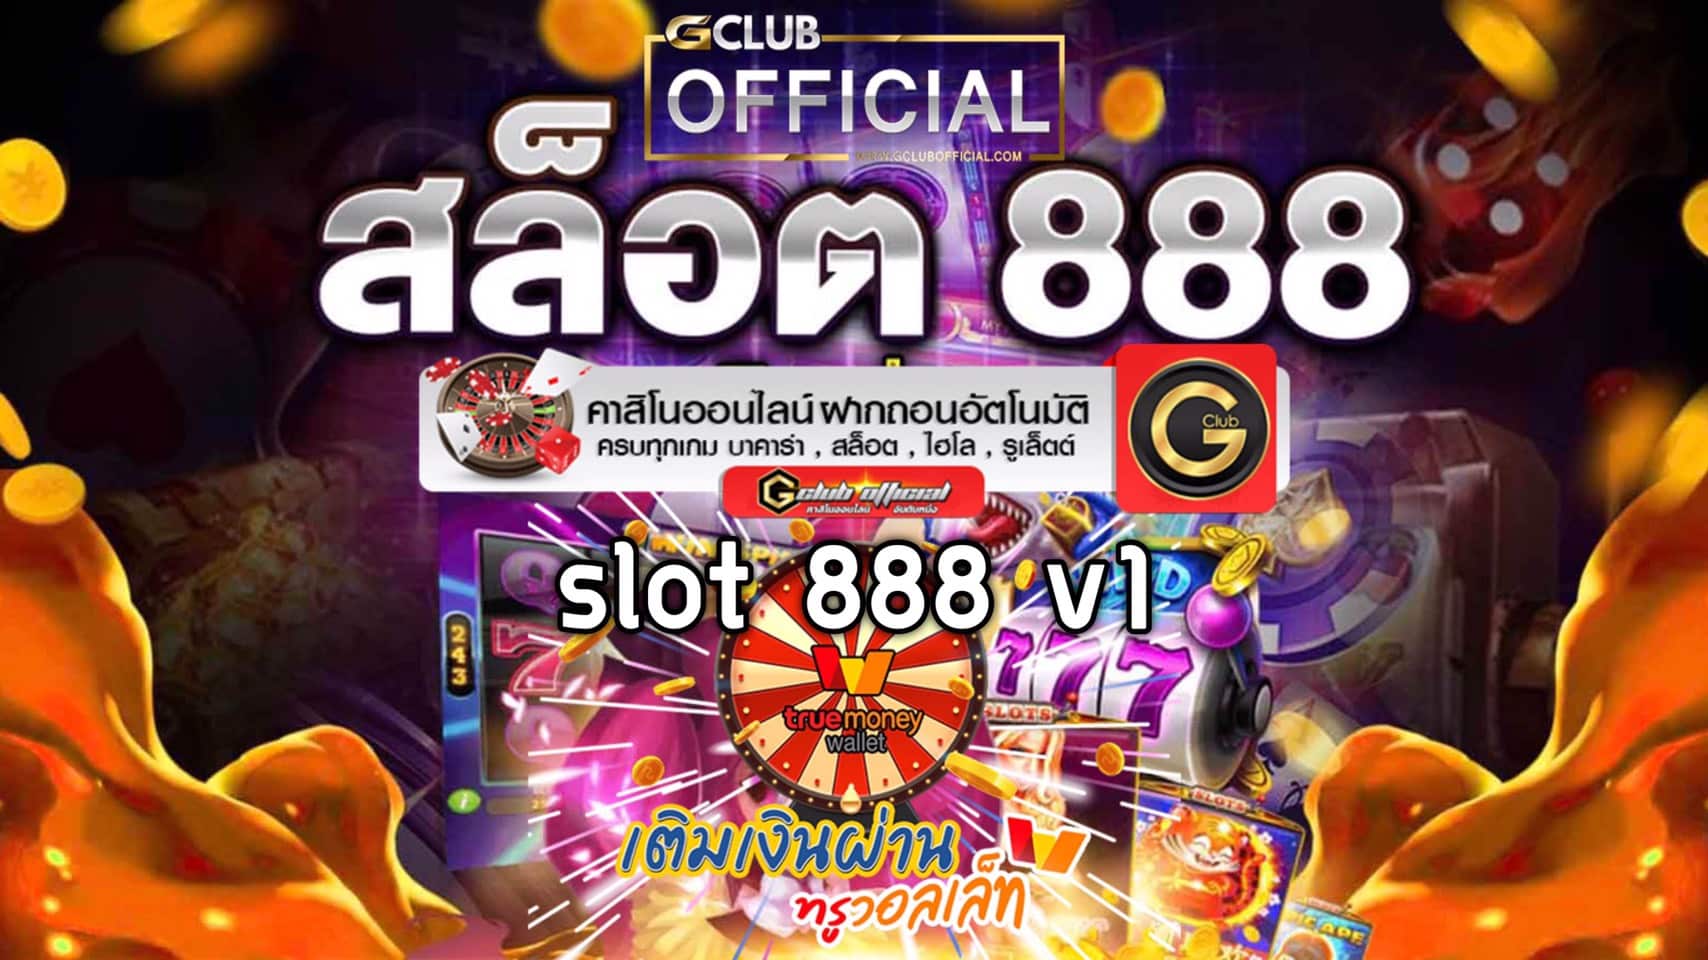 slot888 รับฝาก Ture Wallet